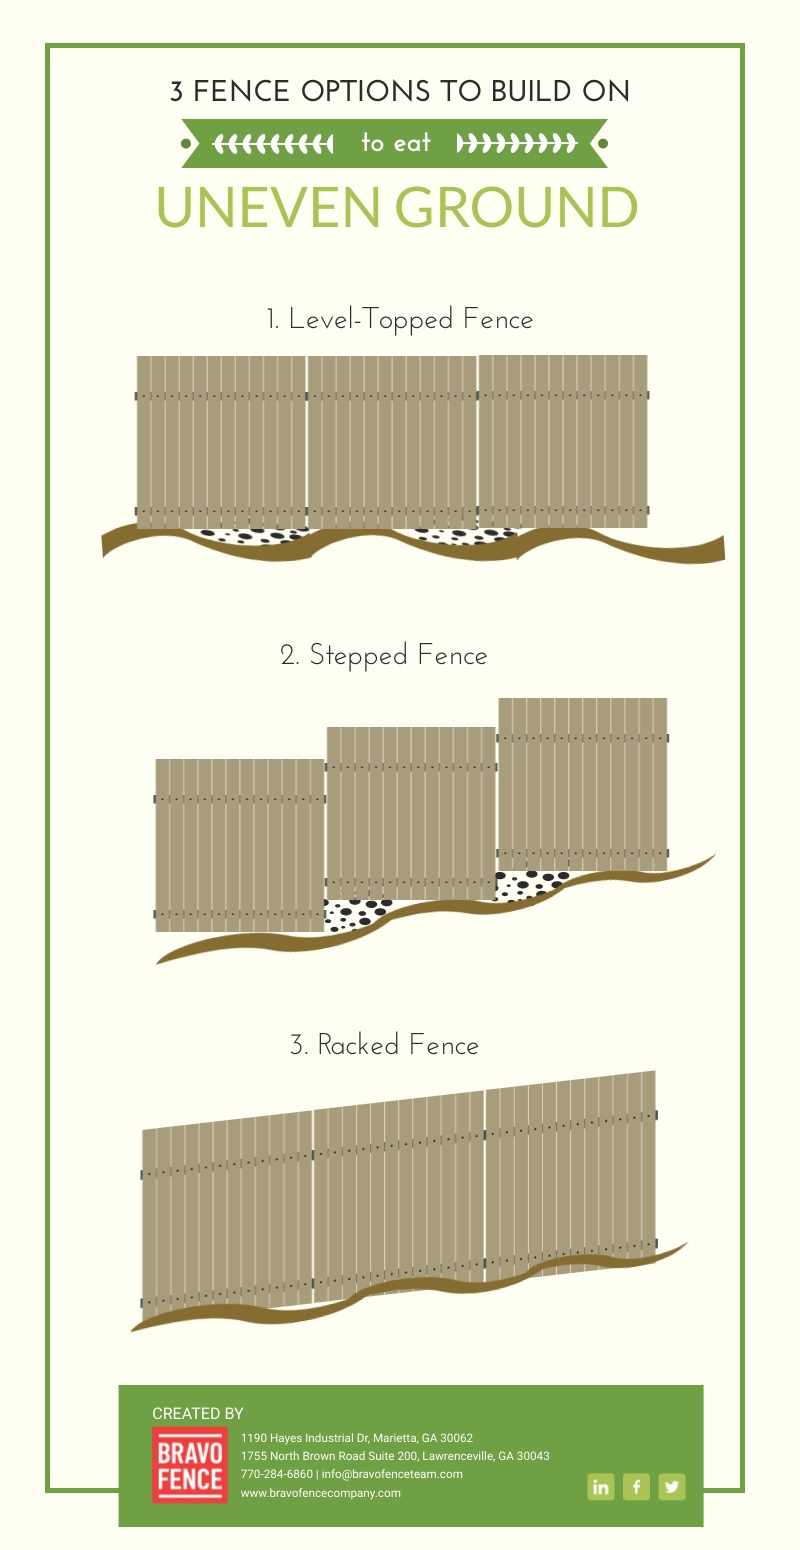 Building a Fence on Uneven Ground